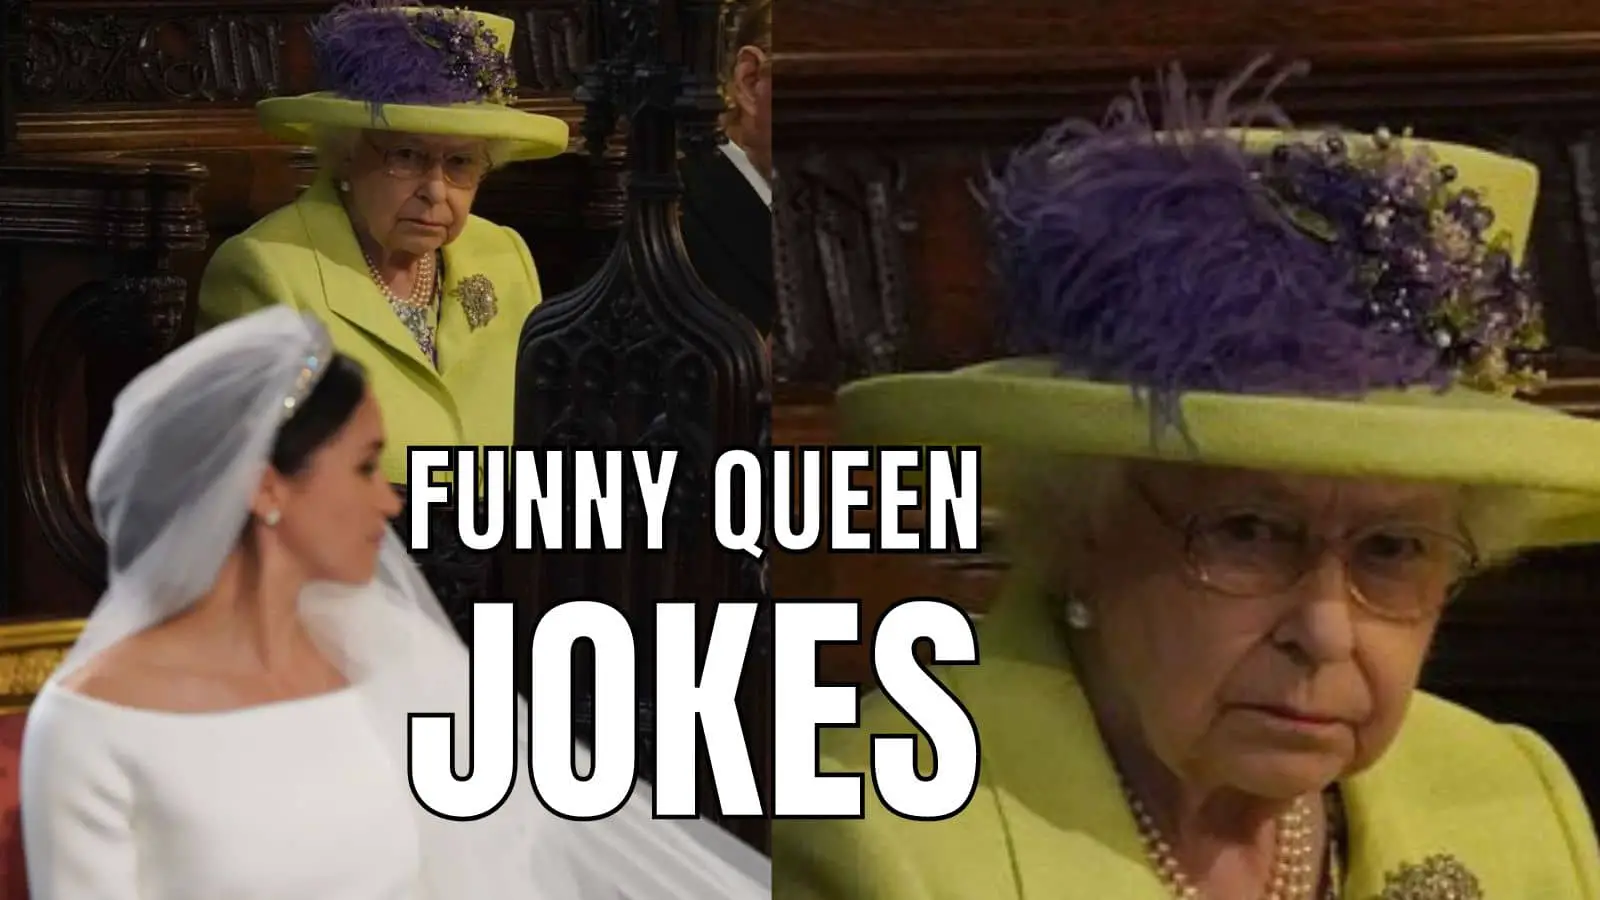 50 Queen Jokes You Can't Share With Royal Family In 2022